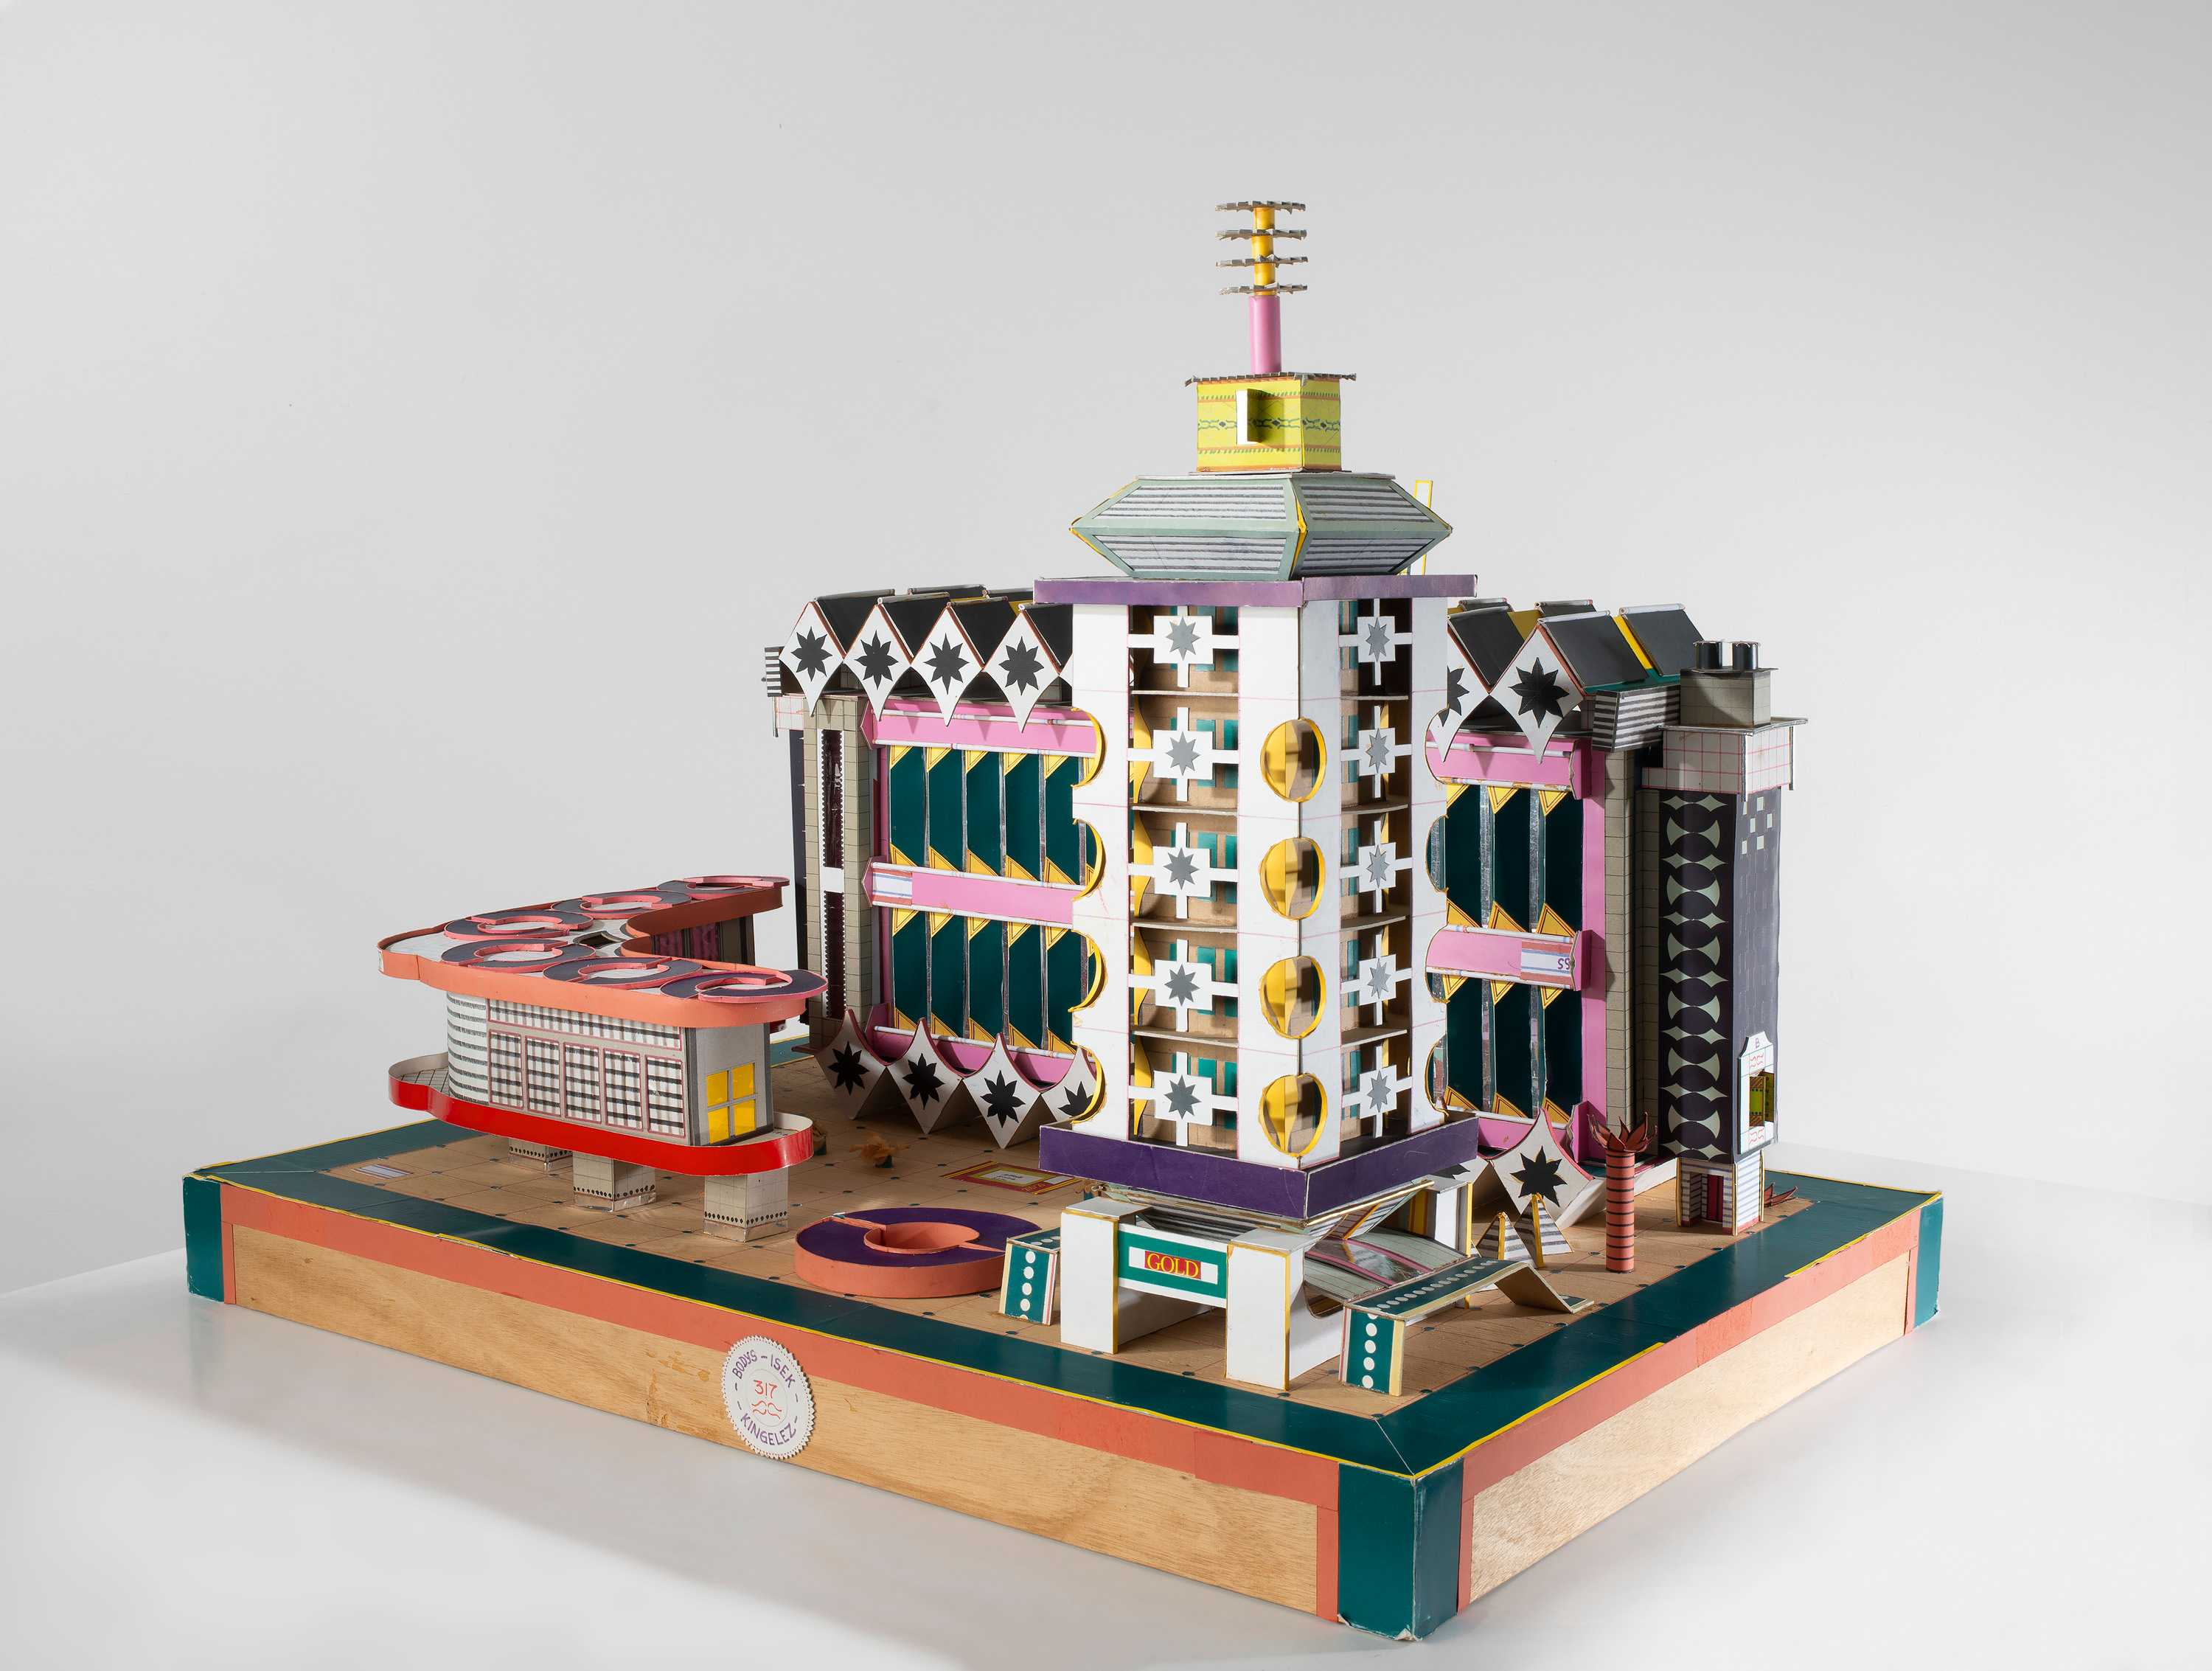 An colorful architectural model of a modern building by Bodys Isek Kingelez.